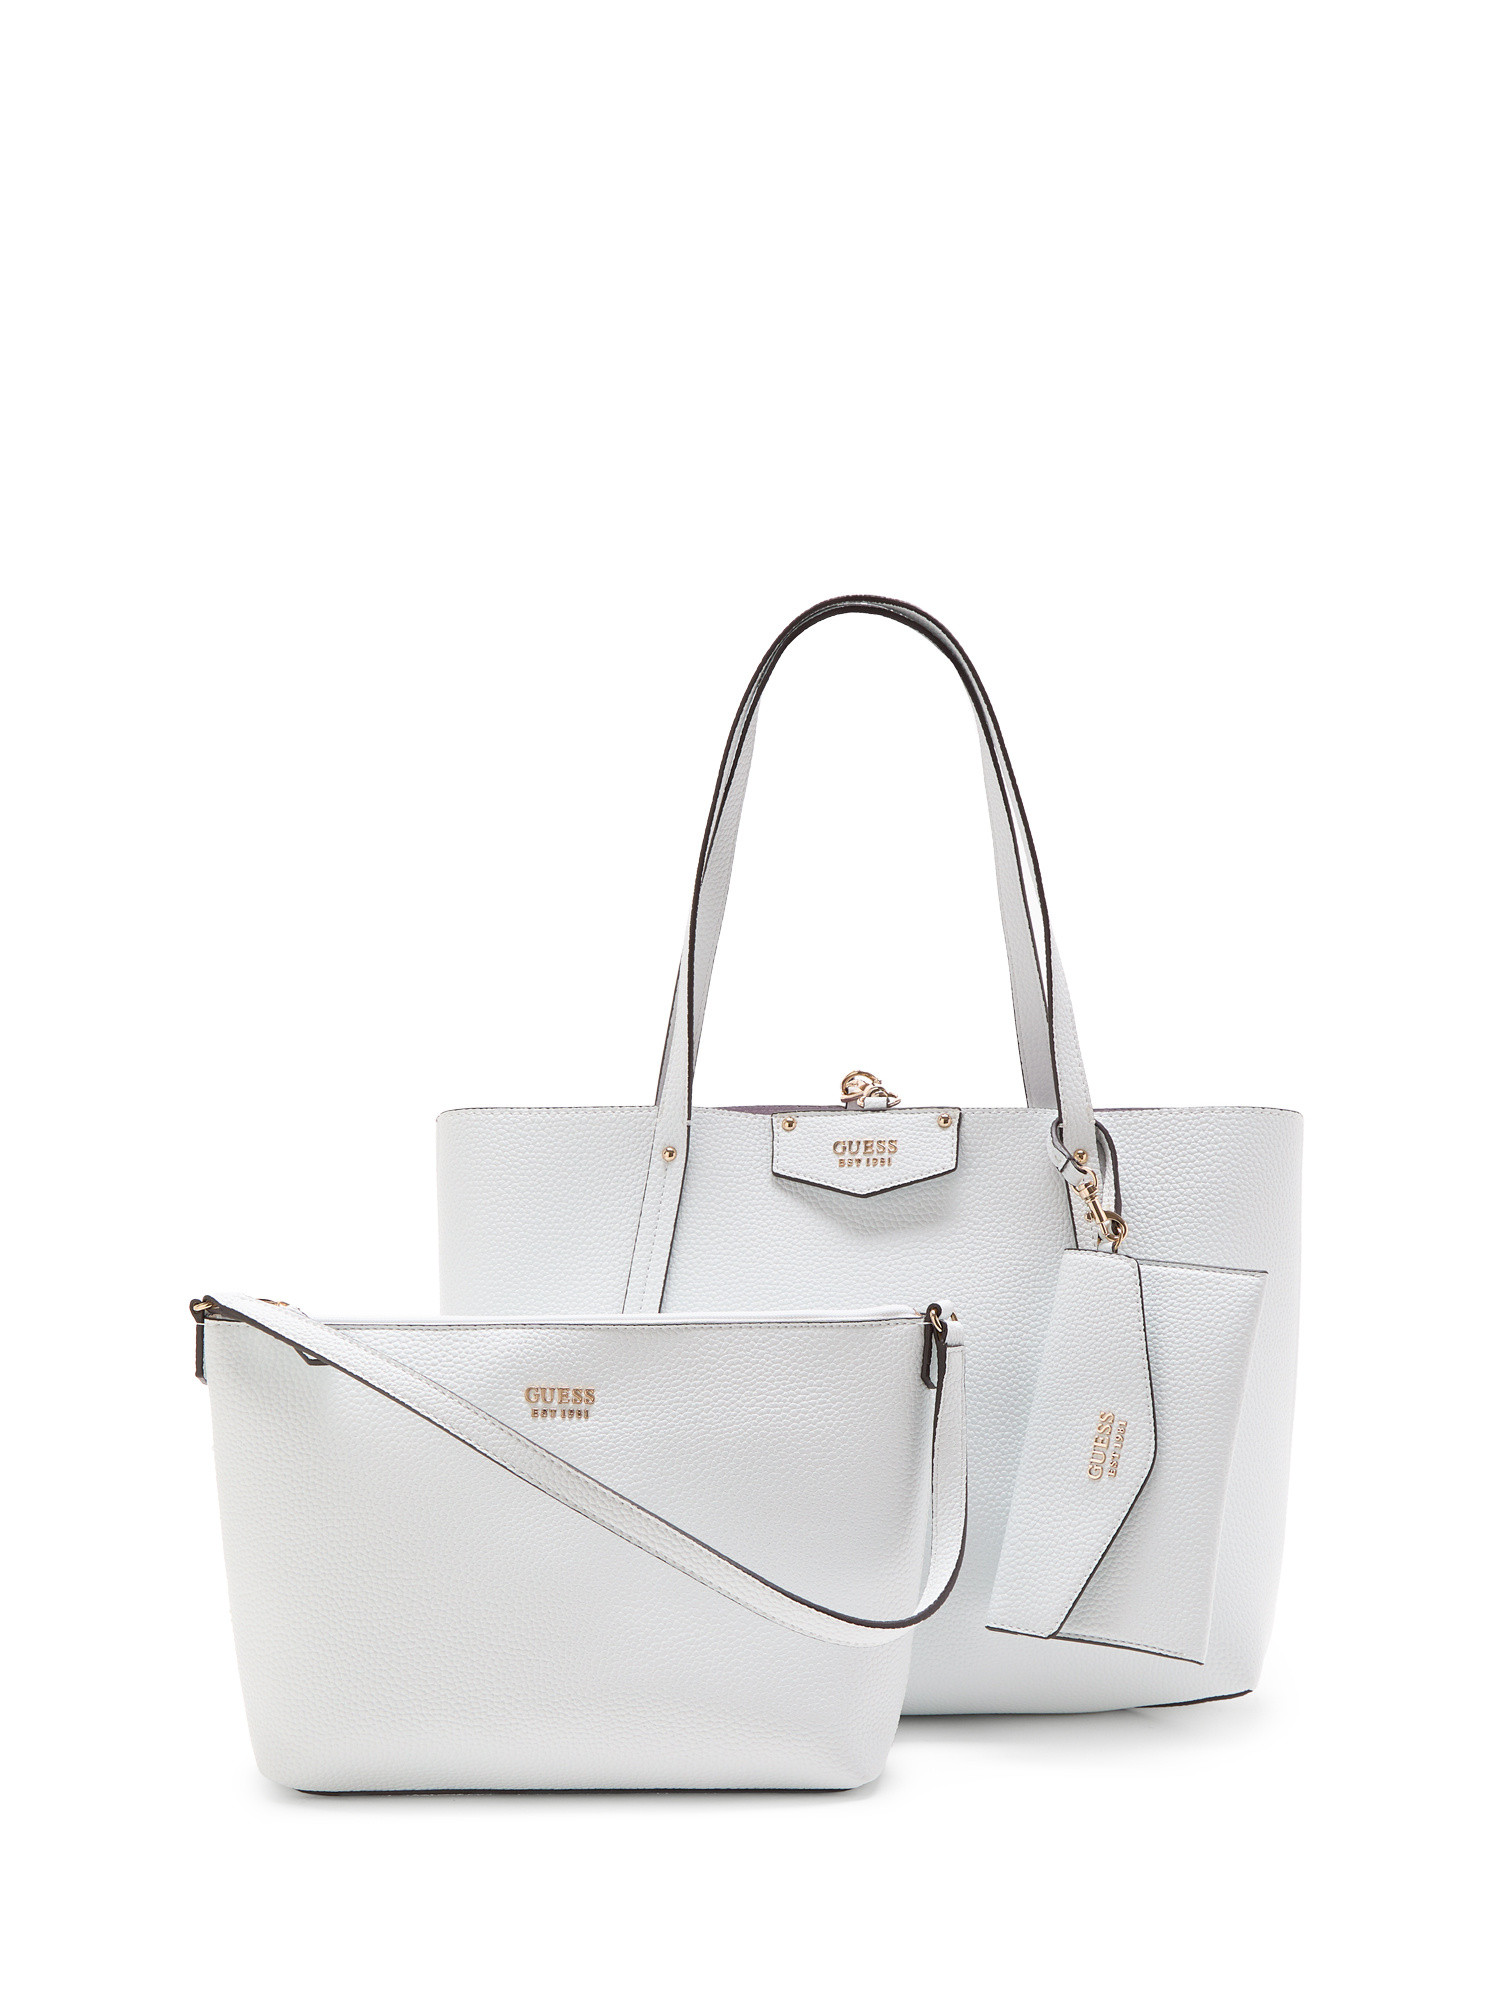 Guess - Brenton eco shopper, White, large image number 3